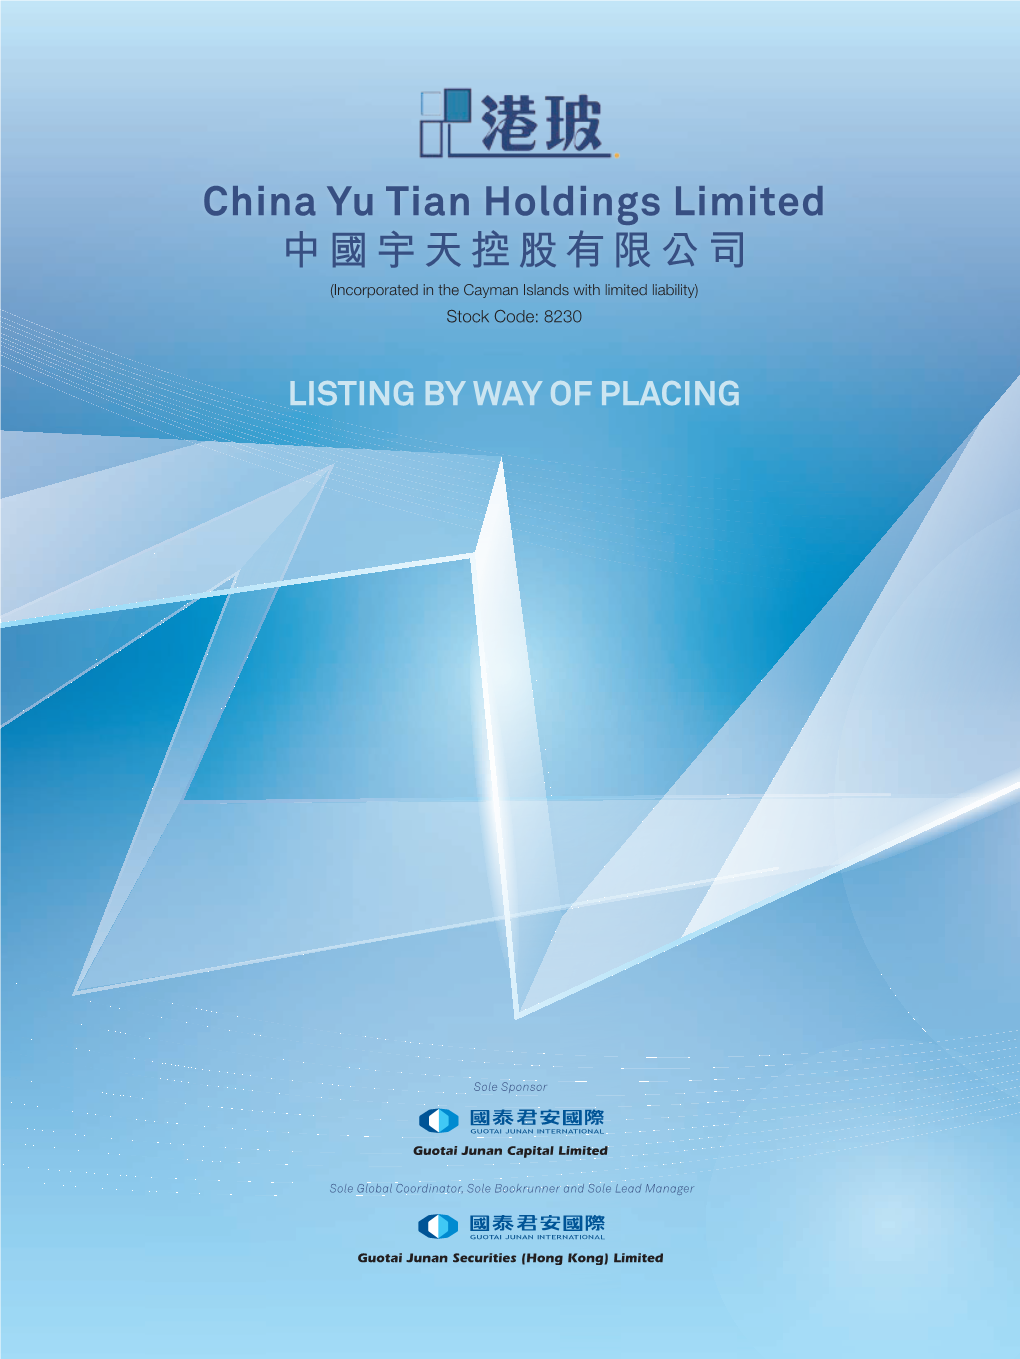 China Yu Tian Holdings Limited 中國宇天控股有限公司 (Incorporated in the Cayman Islands with Limited Liability) Stock Code: 8230